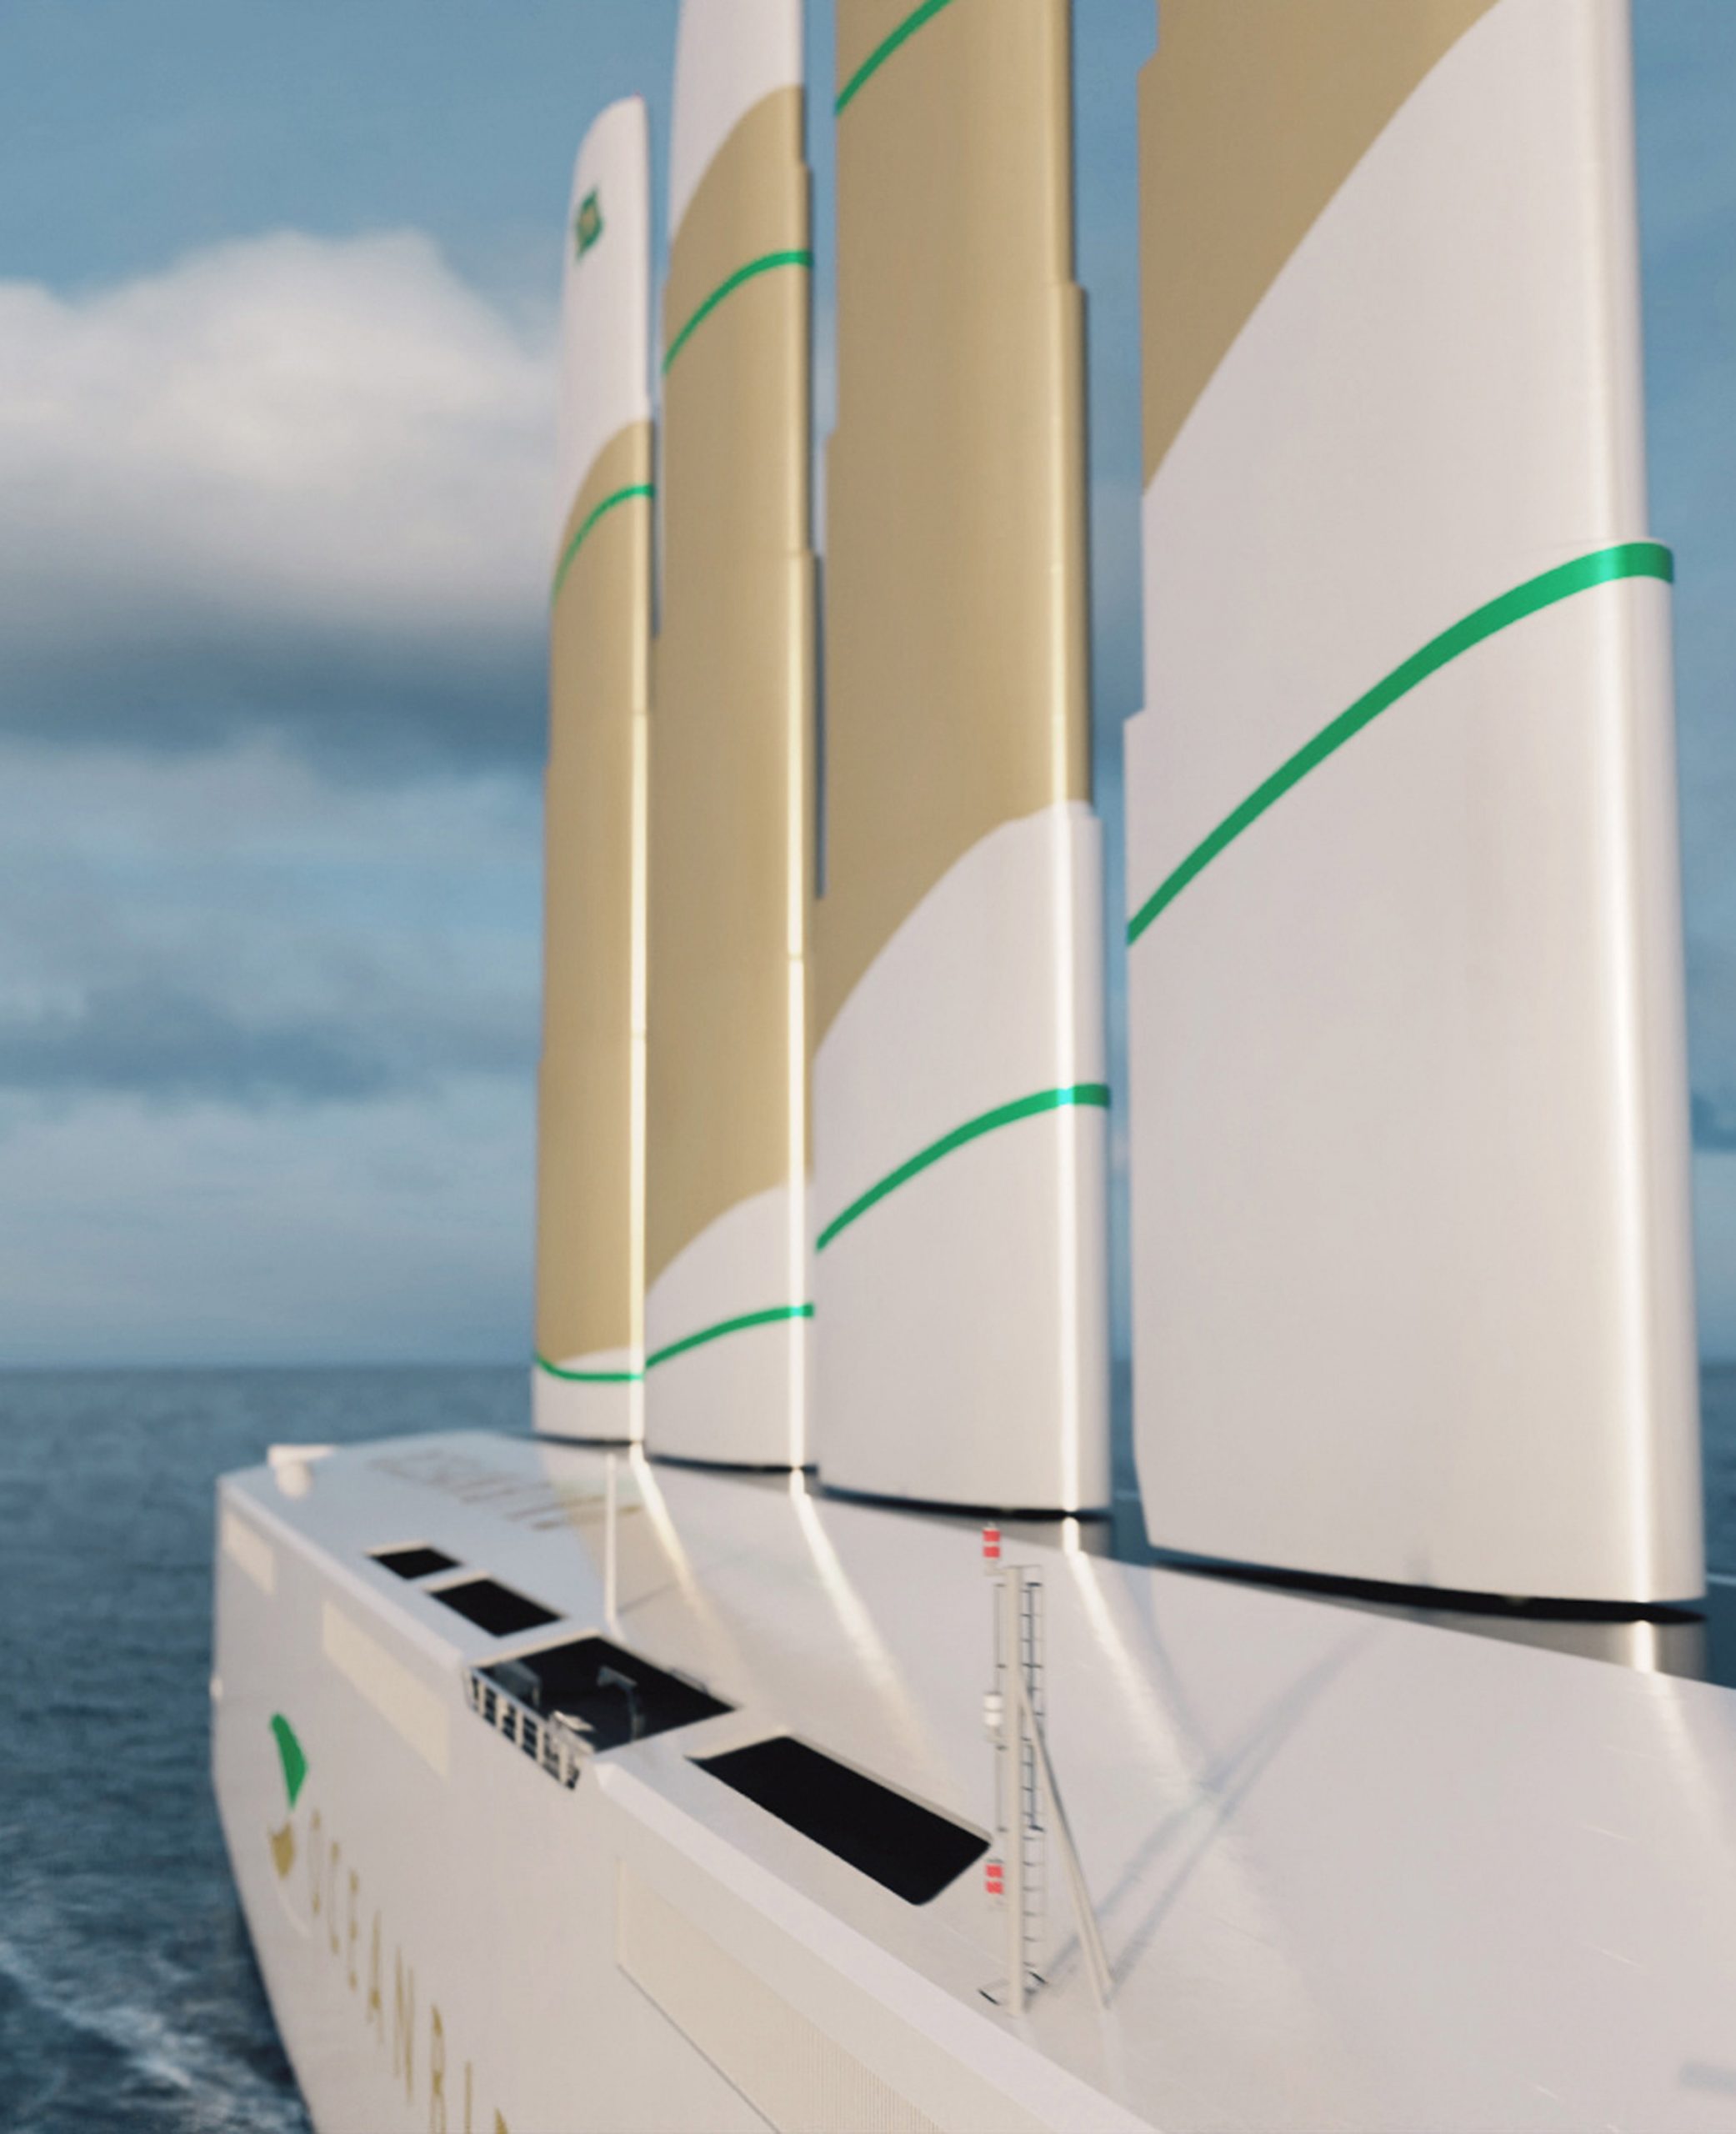 Oceanbird will be the world's largest wind-powered vessel